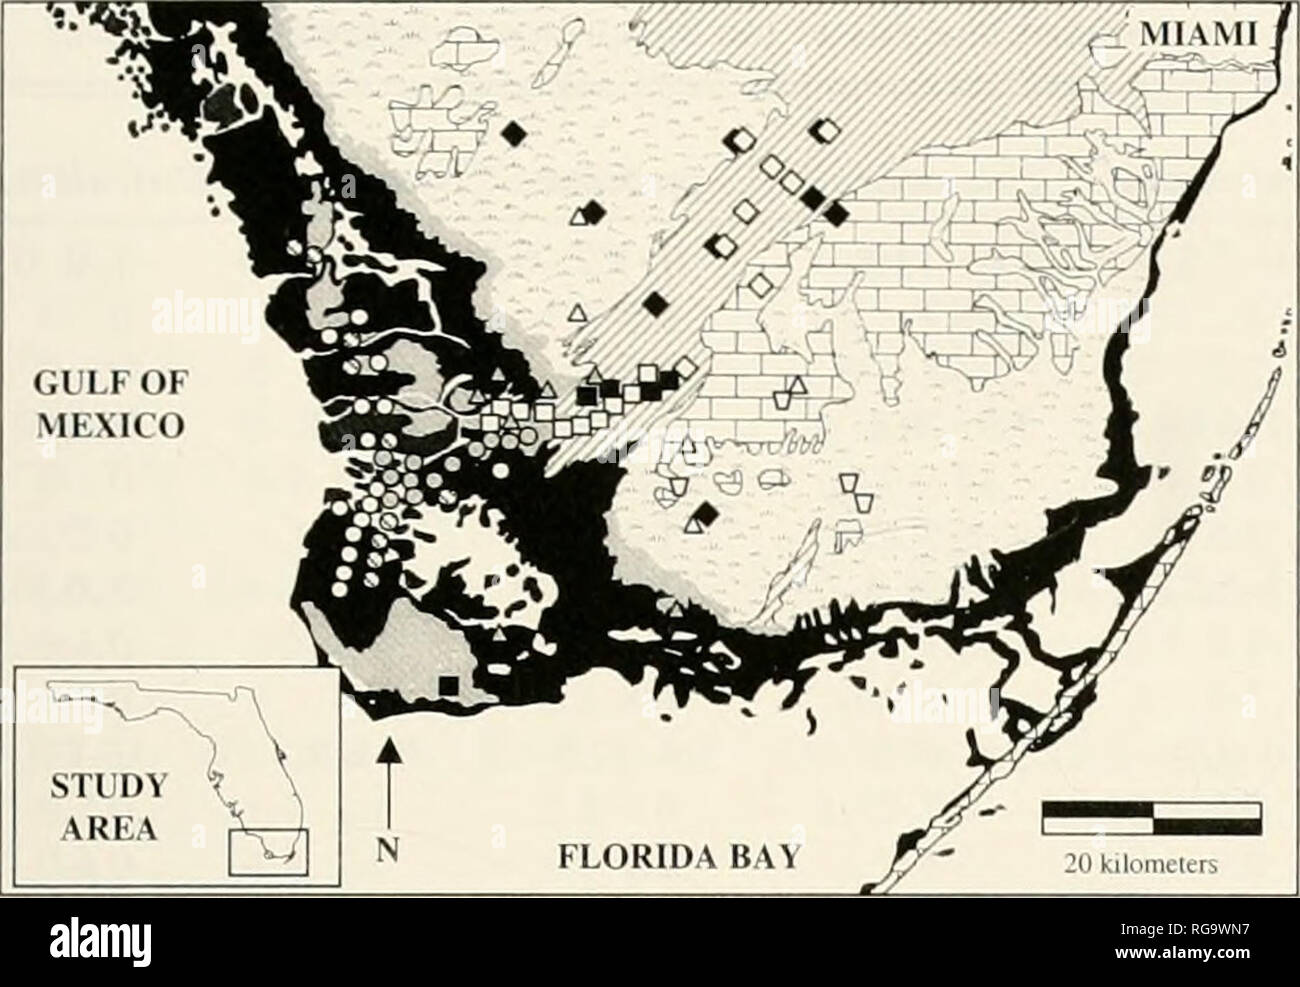 . Bulletins of American paleontology. Pollen Zonation: O'Neal et al. 119. Cluster Group Membership Â® Cluster 1 O Cluster 2 O Clusters Mangrove Swamp â¦ Cluster 4 O Cluster 5 Freshwater Marsh â Cluster h a Cluster? Headwater Marsh A Clusters A Cluster 9 Brackish and Transitional Marsh D Cluster 10 Ipland Physiographic Provinces ^^1 Mangrove Swamp 1 I Brackish &amp; Transitional Marsh fy â /'â w Freshwater Marsh (Slough) I J Freshwater Marsh with Hammocks P I I I Limestone Upland Complex Text-figure 7.âOverlay of sample site cluster groupings on phys- iographic map of southwest Florida showing  Stock Photo